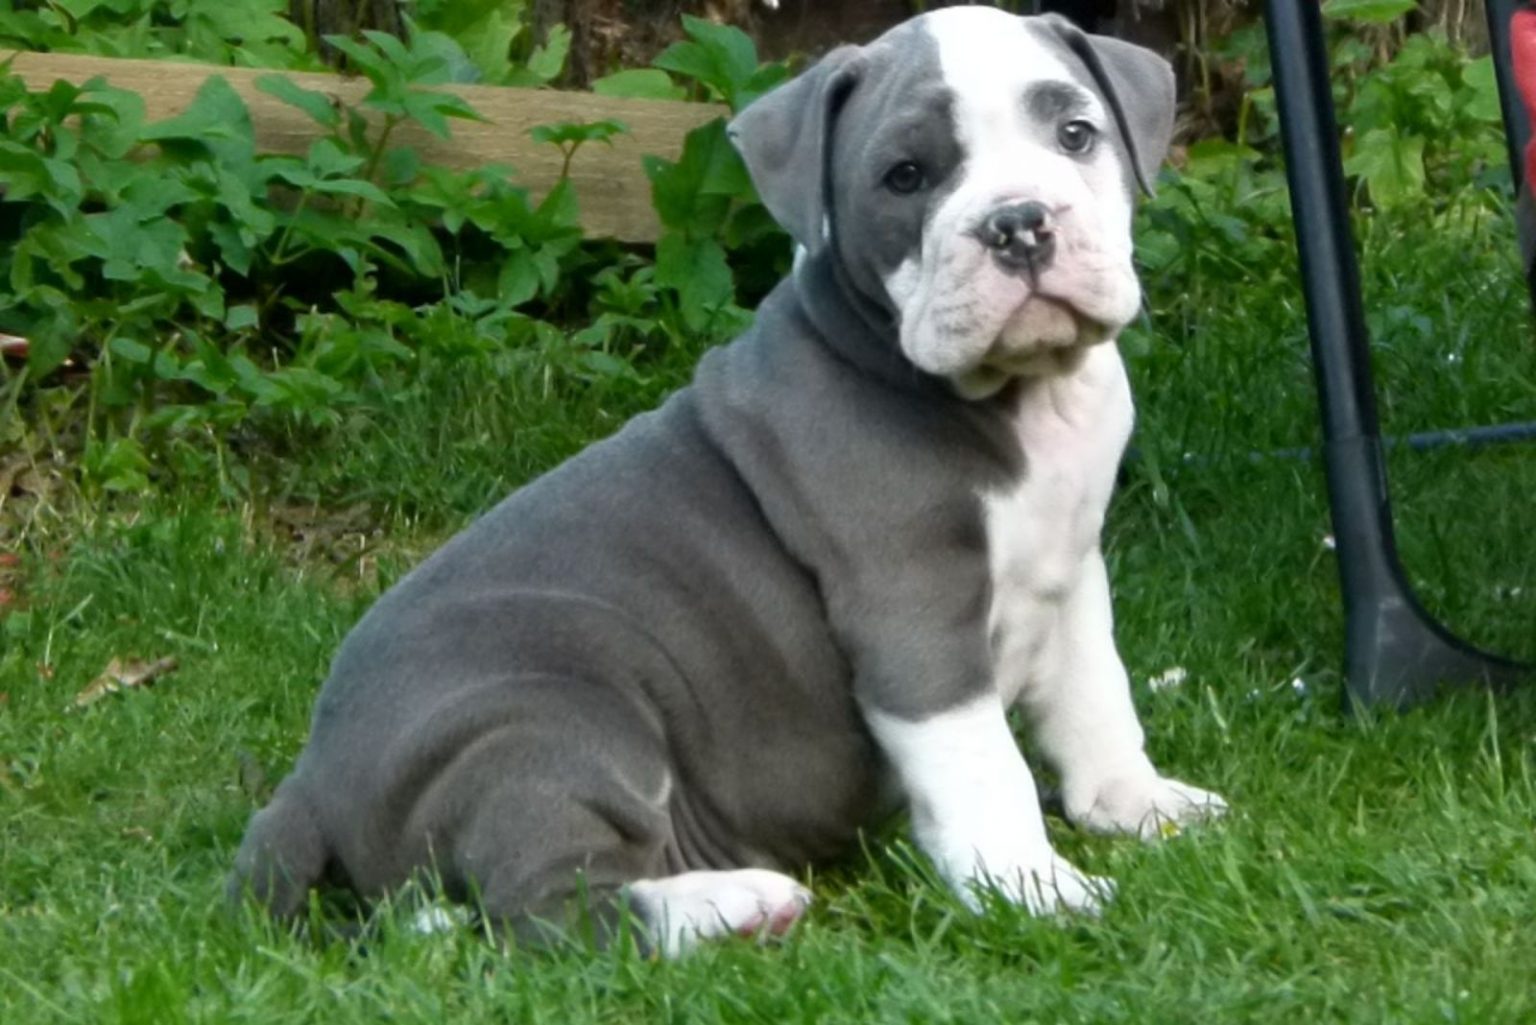 Blue English Bulldog A Guide To Care, Exercise, And Diet